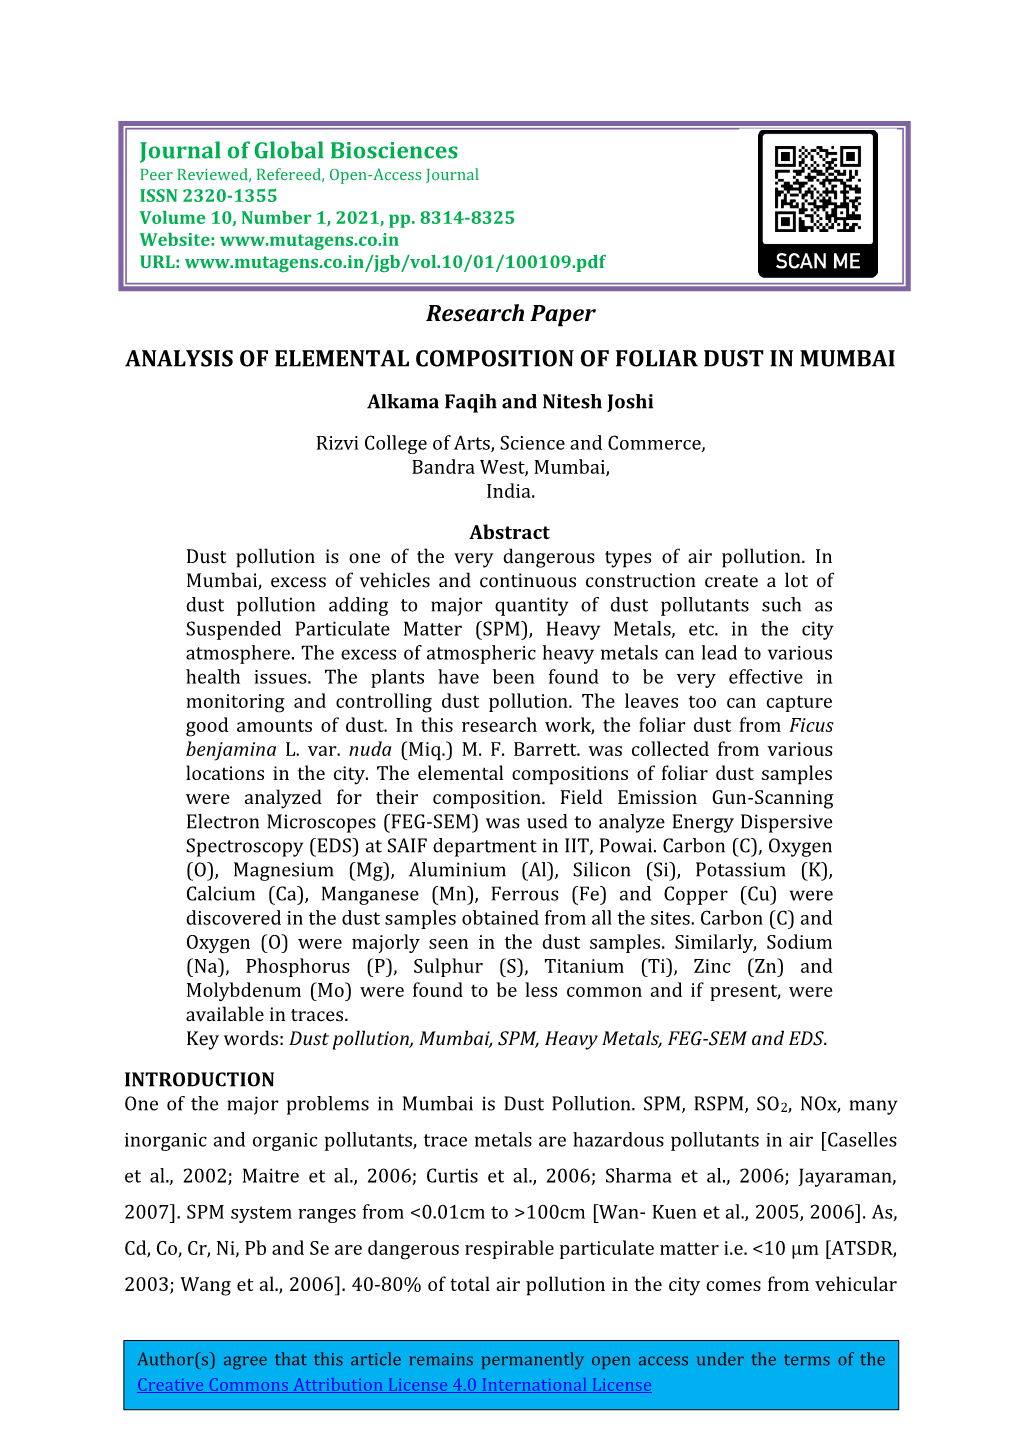 Research Paper ANALYSIS of ELEMENTAL COMPOSITION of FOLIAR DUST in MUMBAI